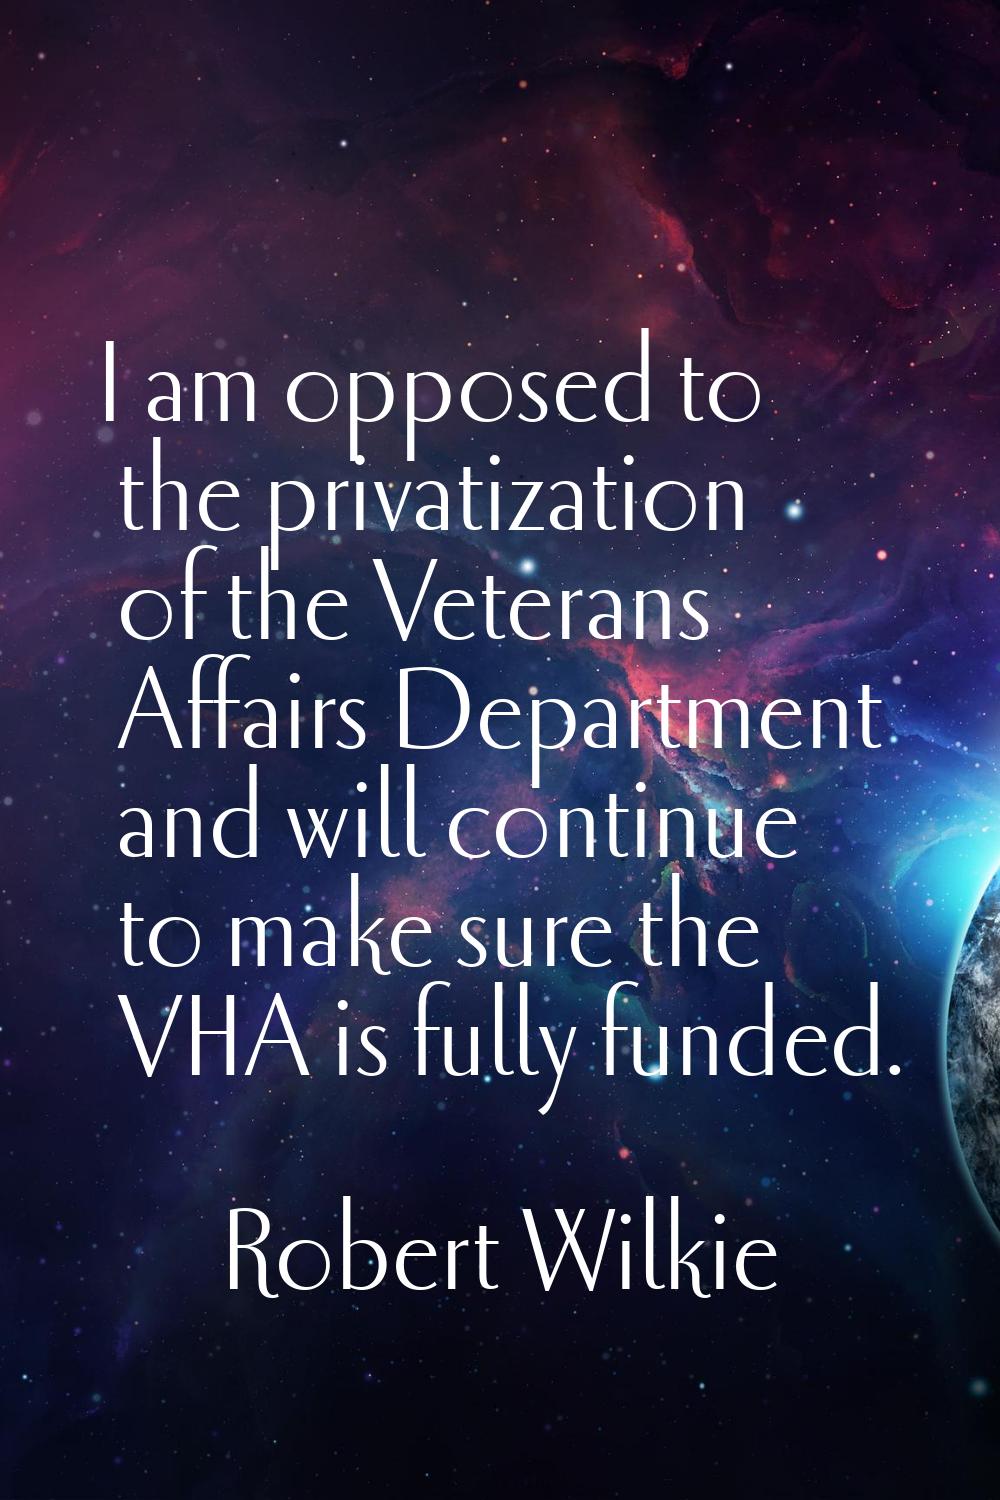 I am opposed to the privatization of the Veterans Affairs Department and will continue to make sure